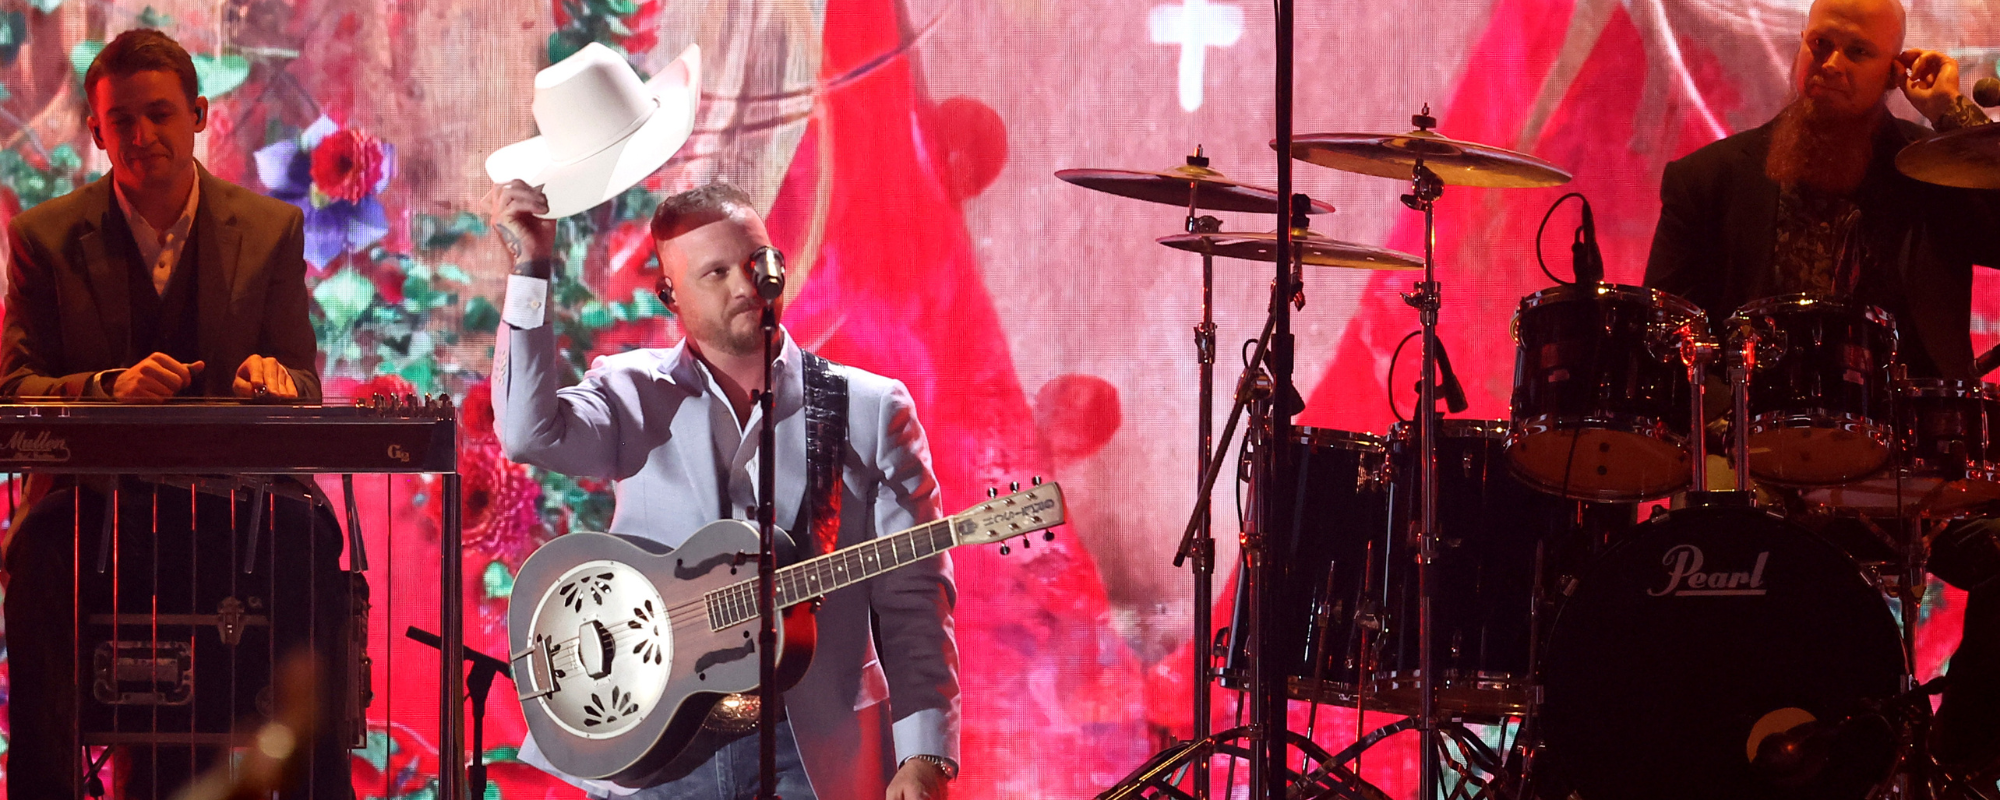 Watch: Cody Johnson Performs “The Painter,” Dedicated to His Wife, During CMA Awards